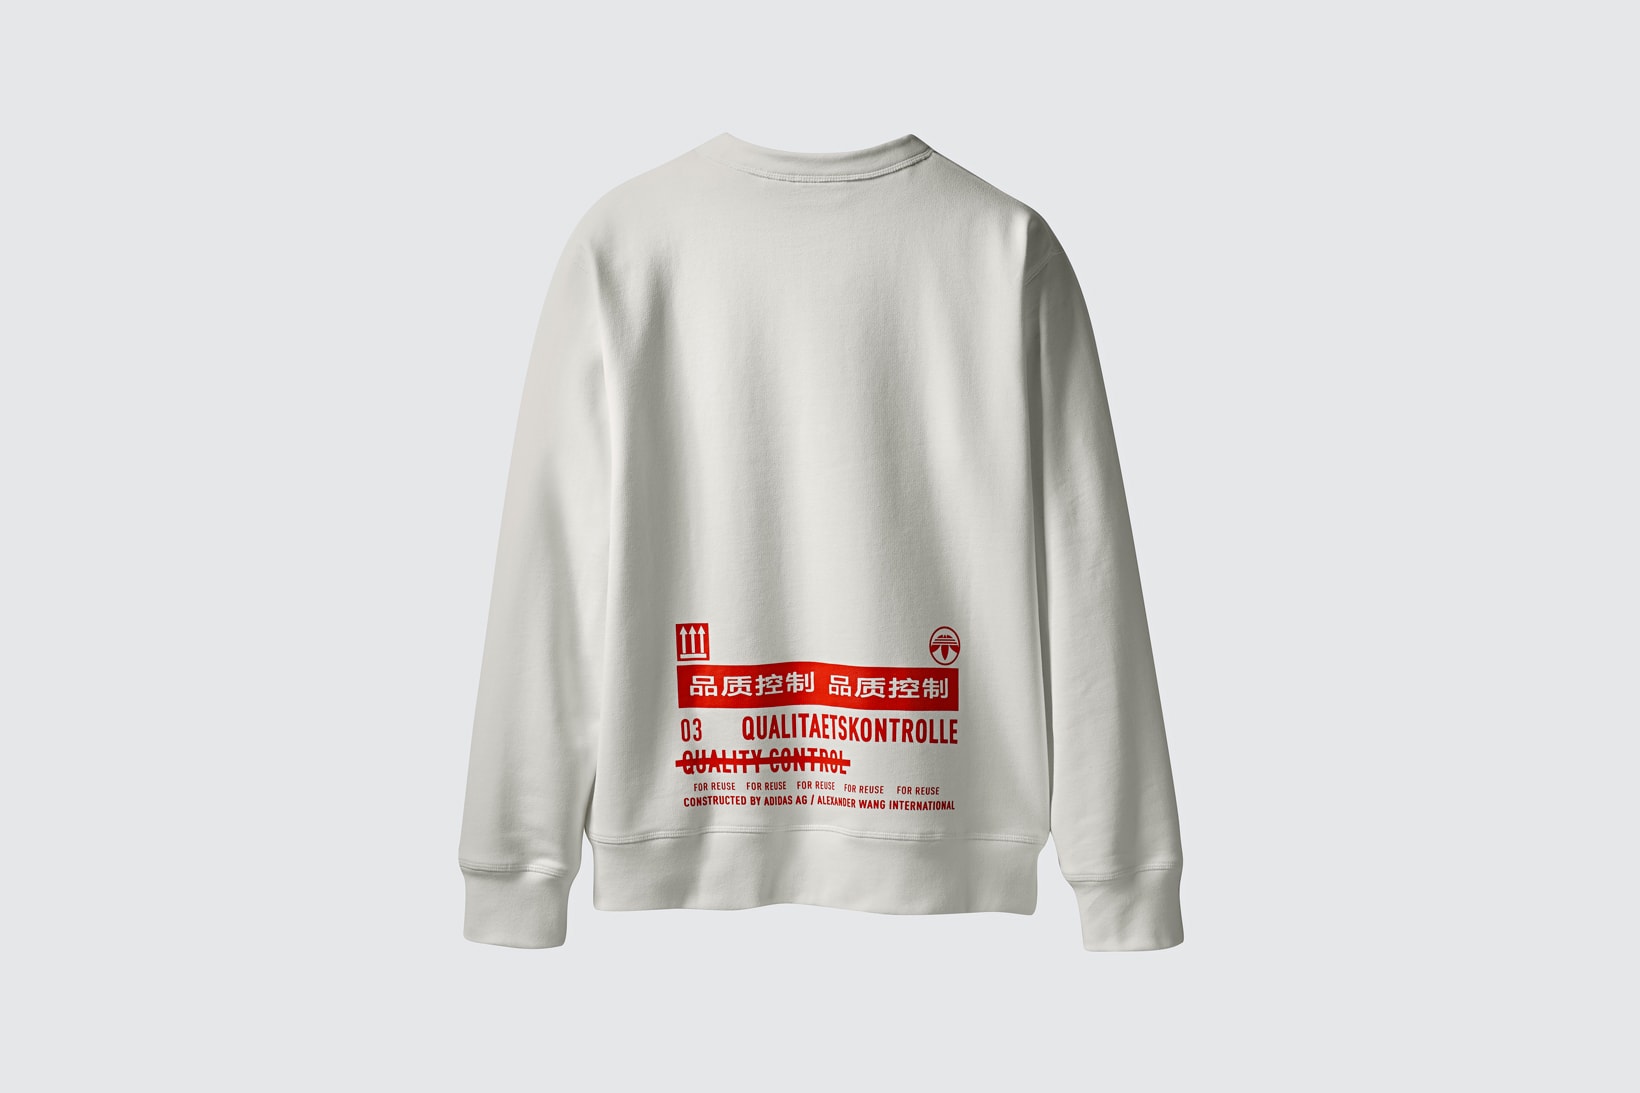 adidas Originals by Alexander Wang Season 3 Collection Sweater White